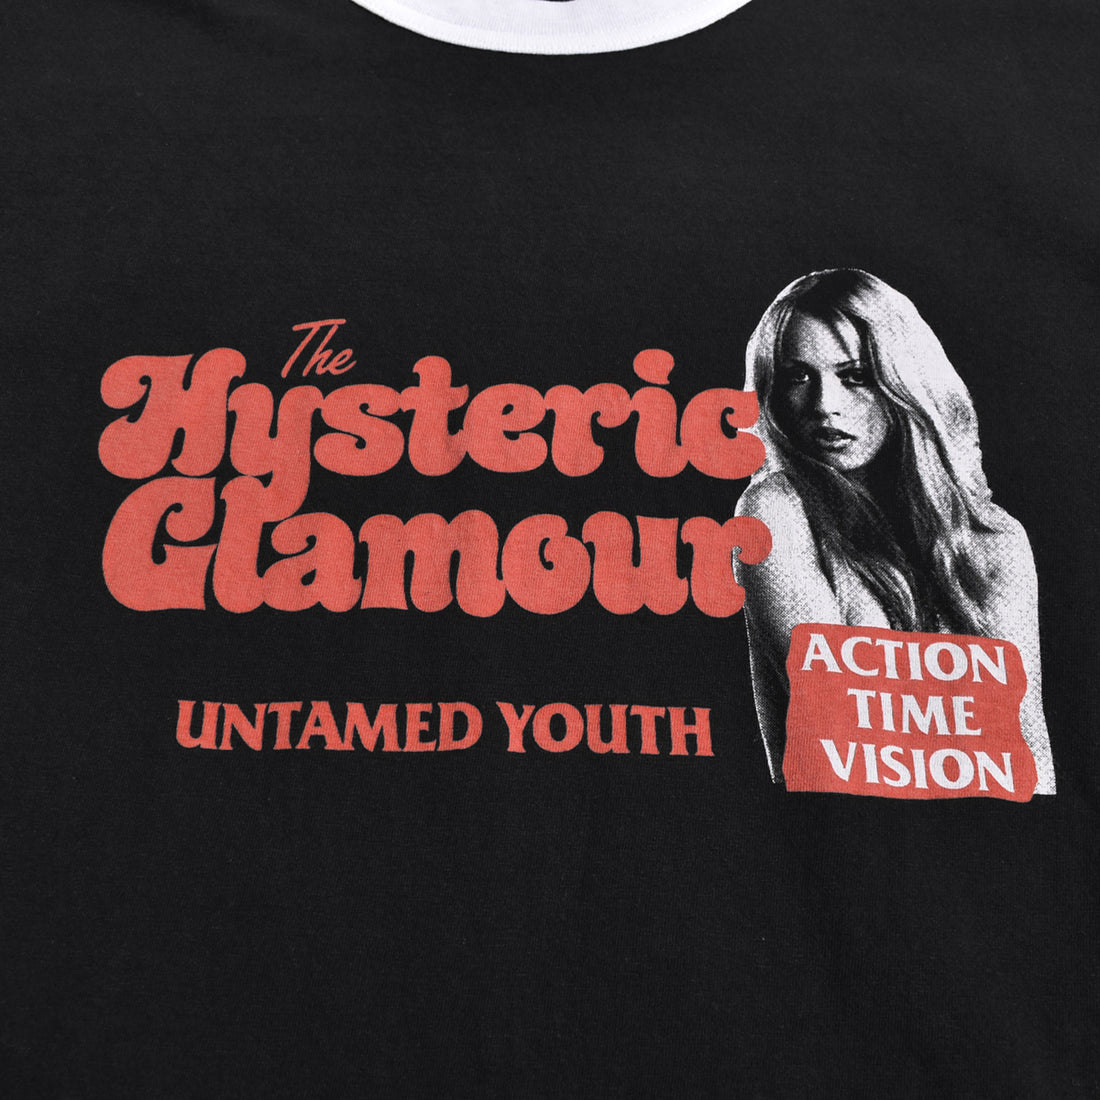 [HYSTERIC GLAMOUR]UNTAMED YOUTH Tシャツ/BLACK×WHITE(02231CT17)